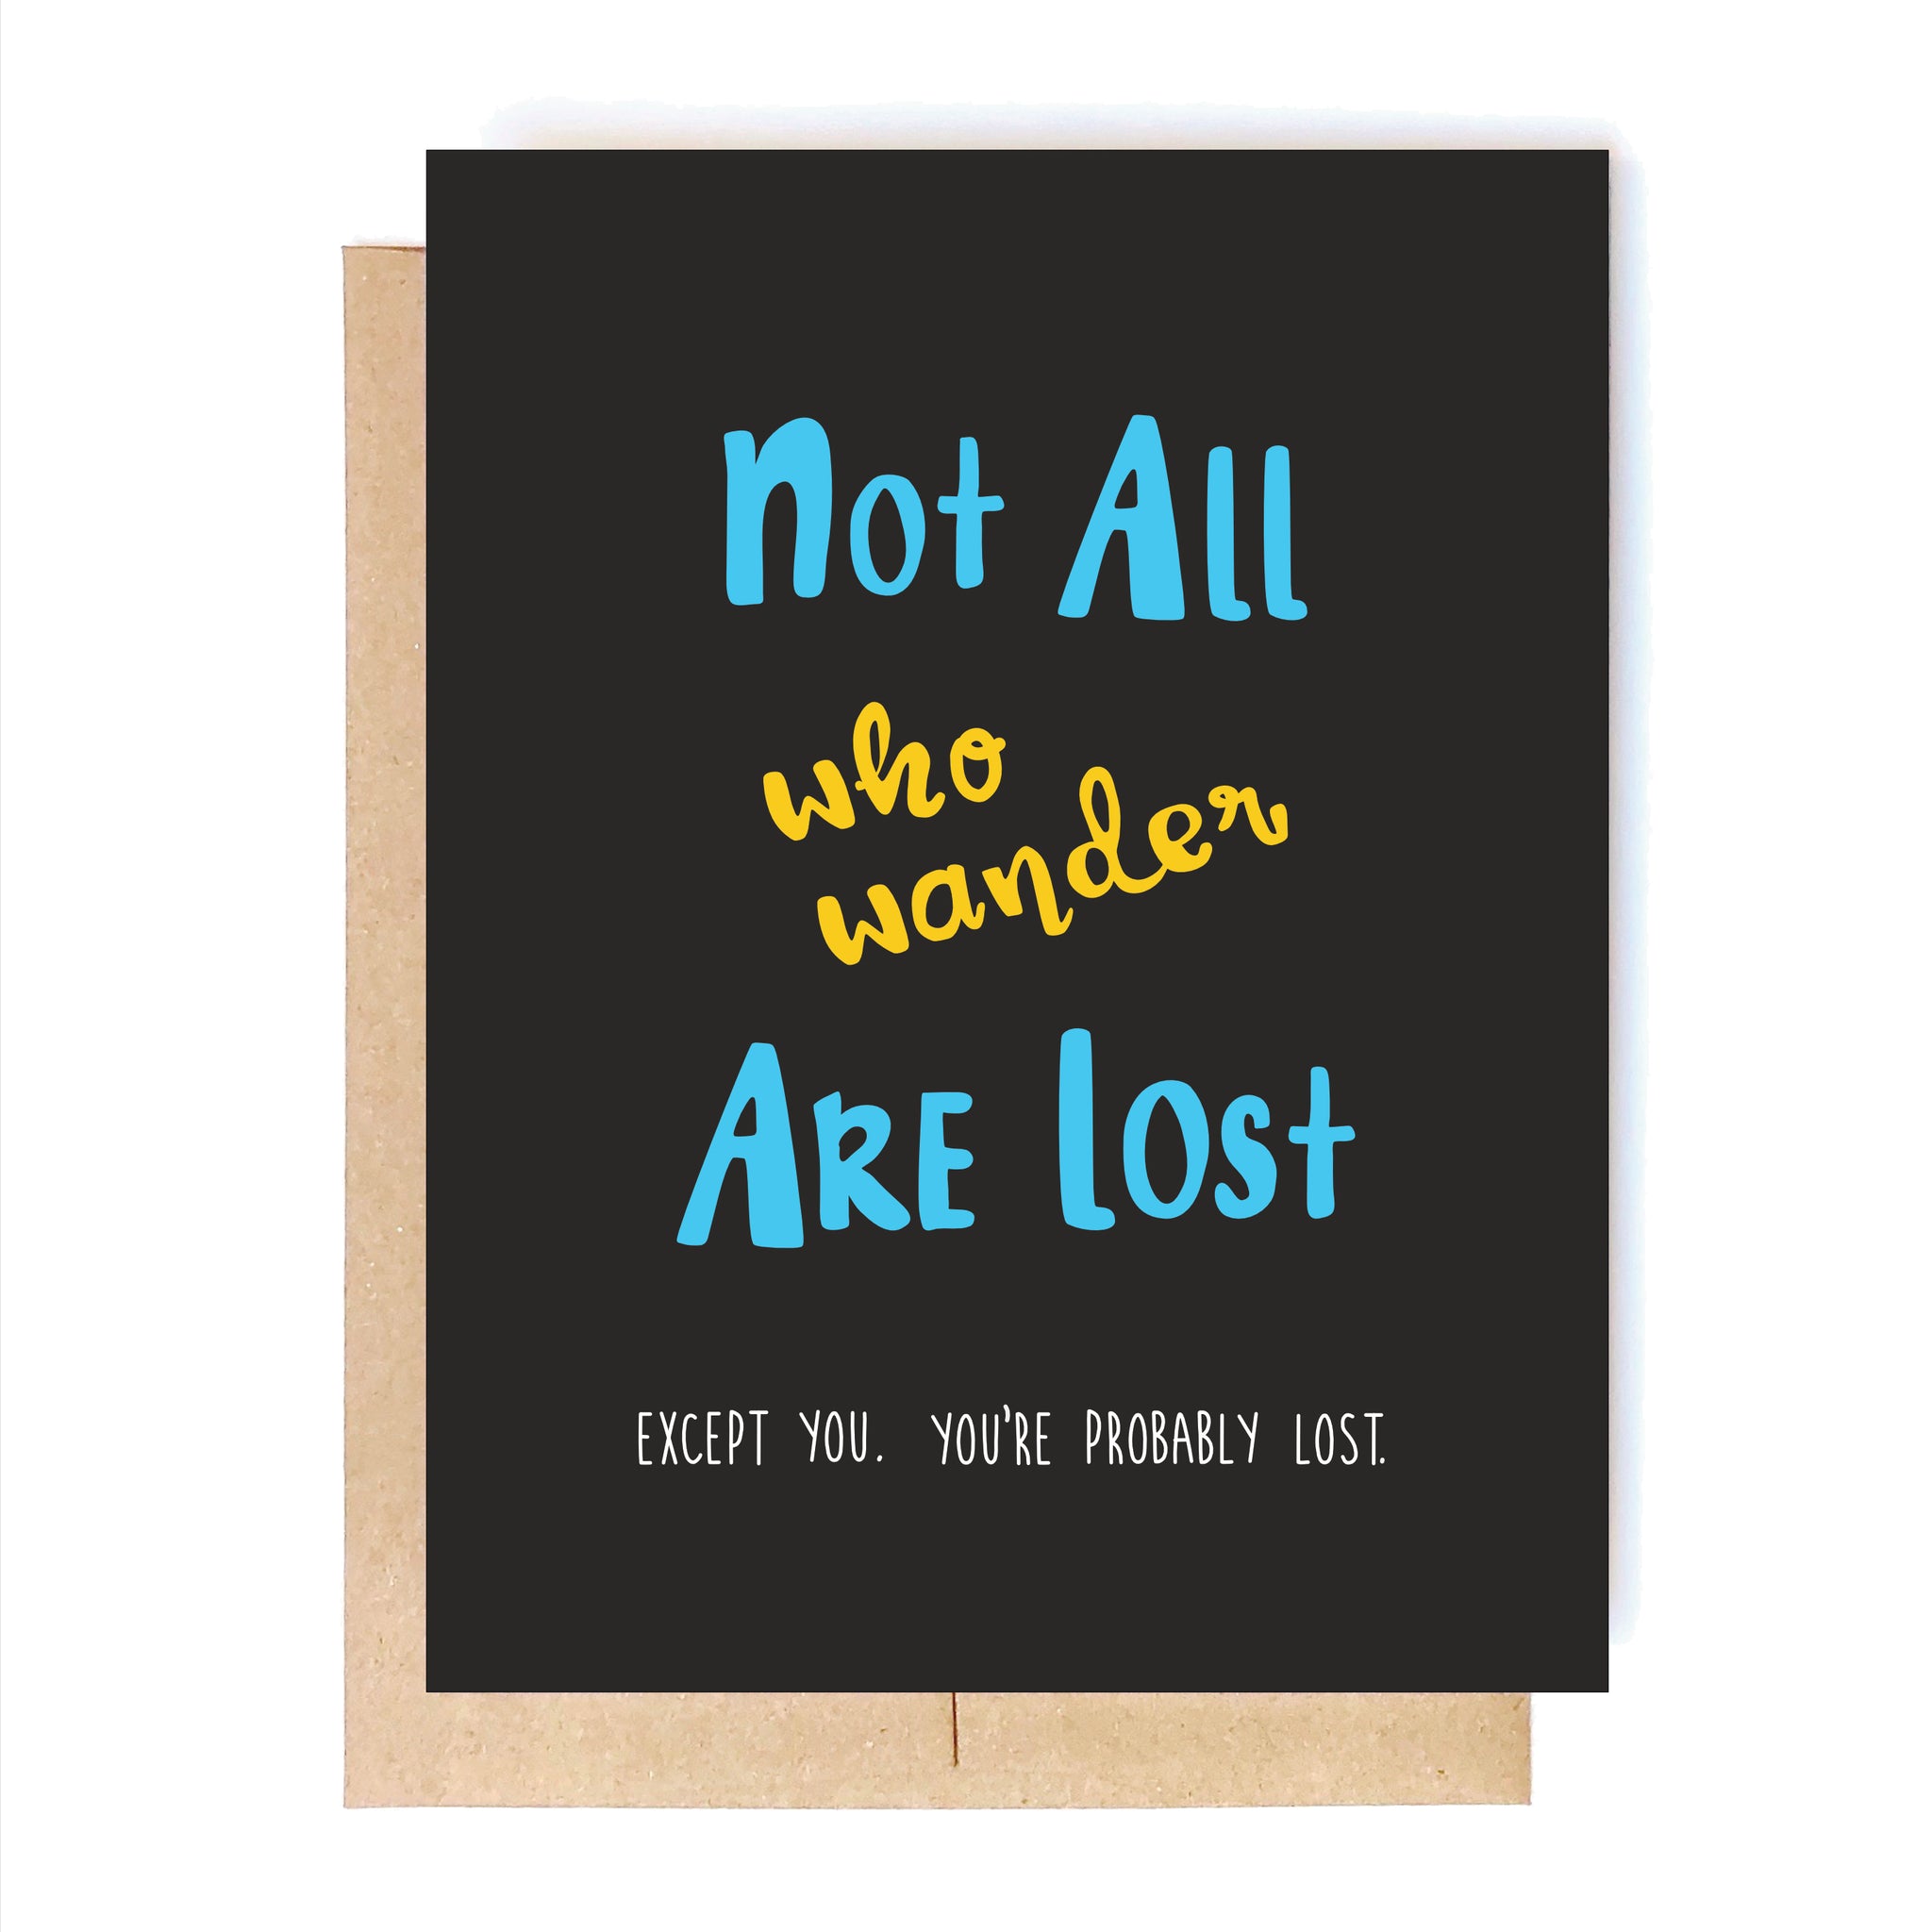 Not all who wander are lost.  Except you. You're probably lost.